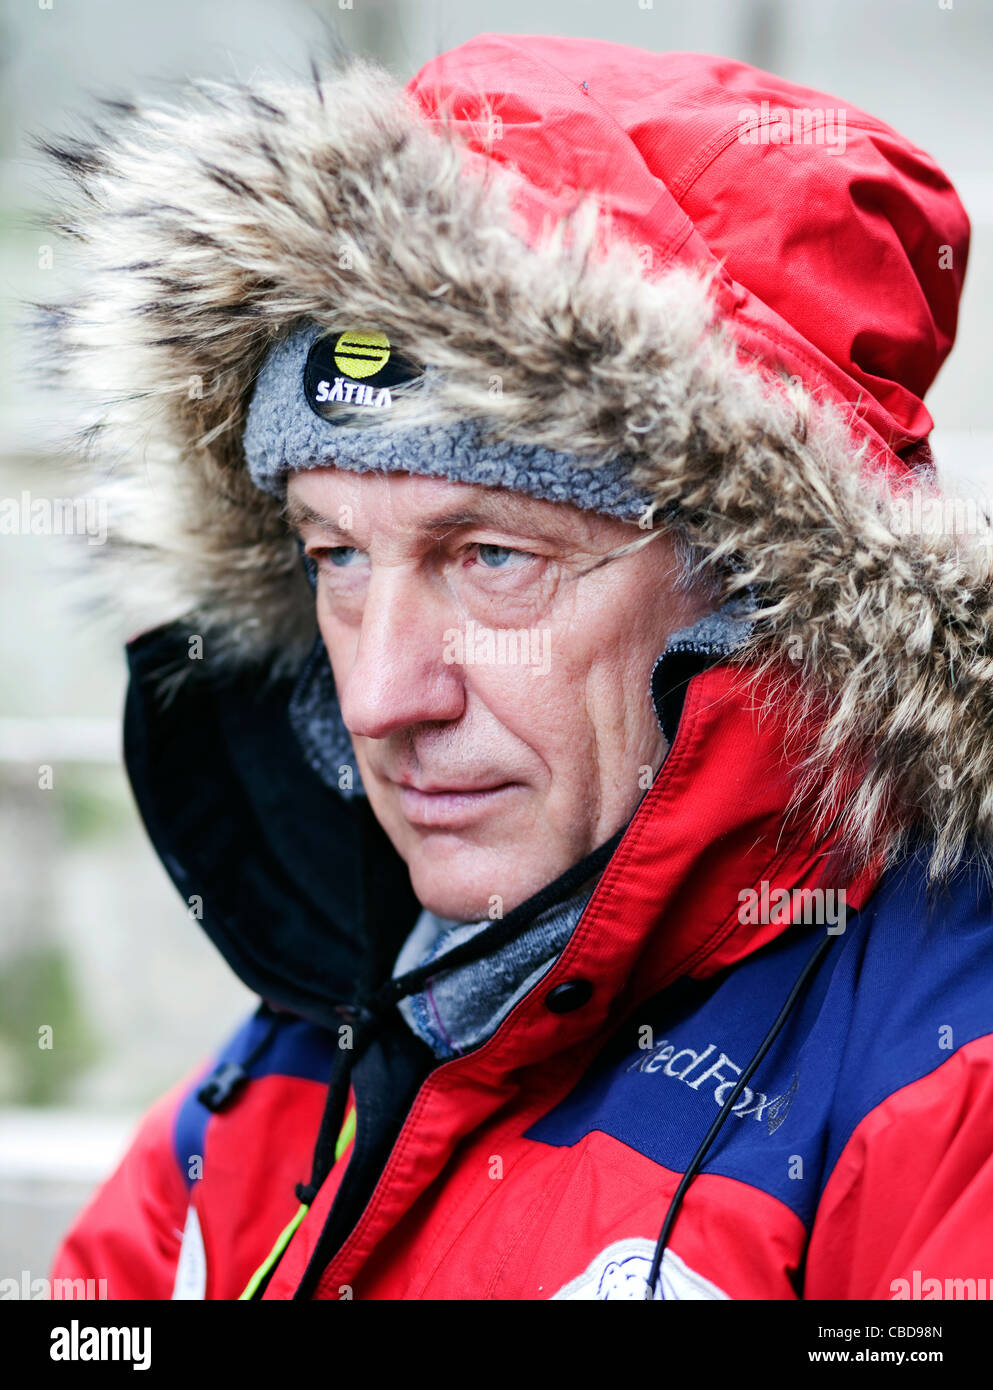 Miroslav Jakes is the first Czech who reached the North Pole on foot.(CTK - miroslav-jakes-is-the-first-czech-who-reached-the-north-pole-on-footctk-CBD98N